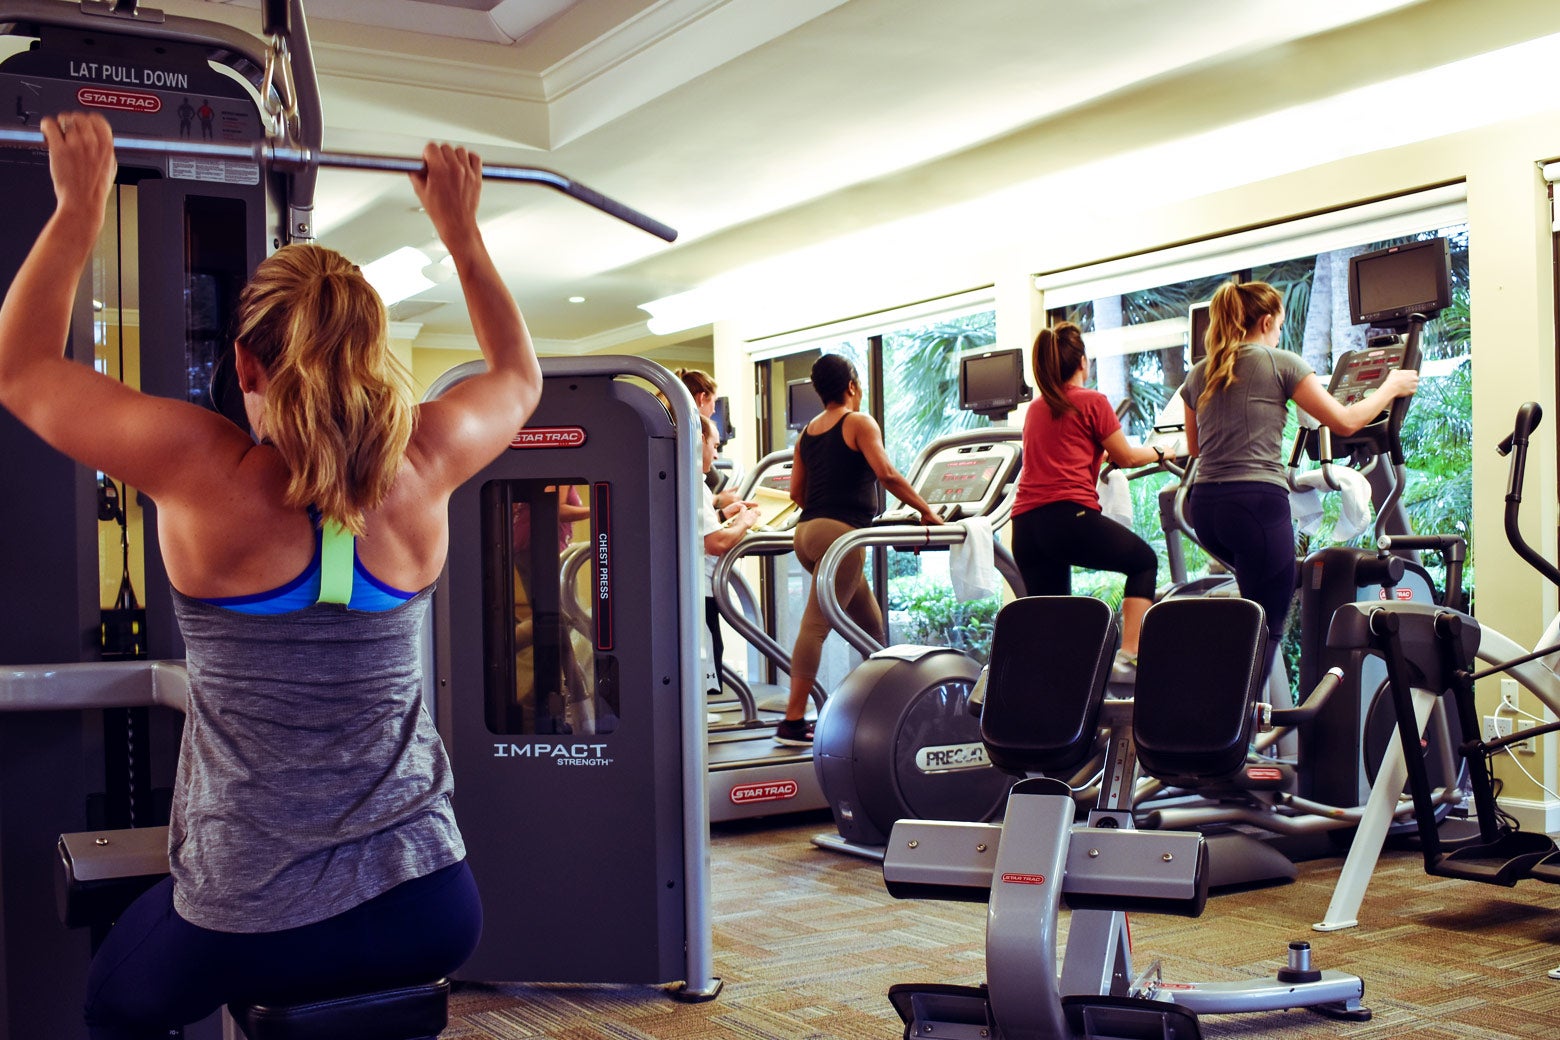 Employees of the Breakers work out in a fitness center.